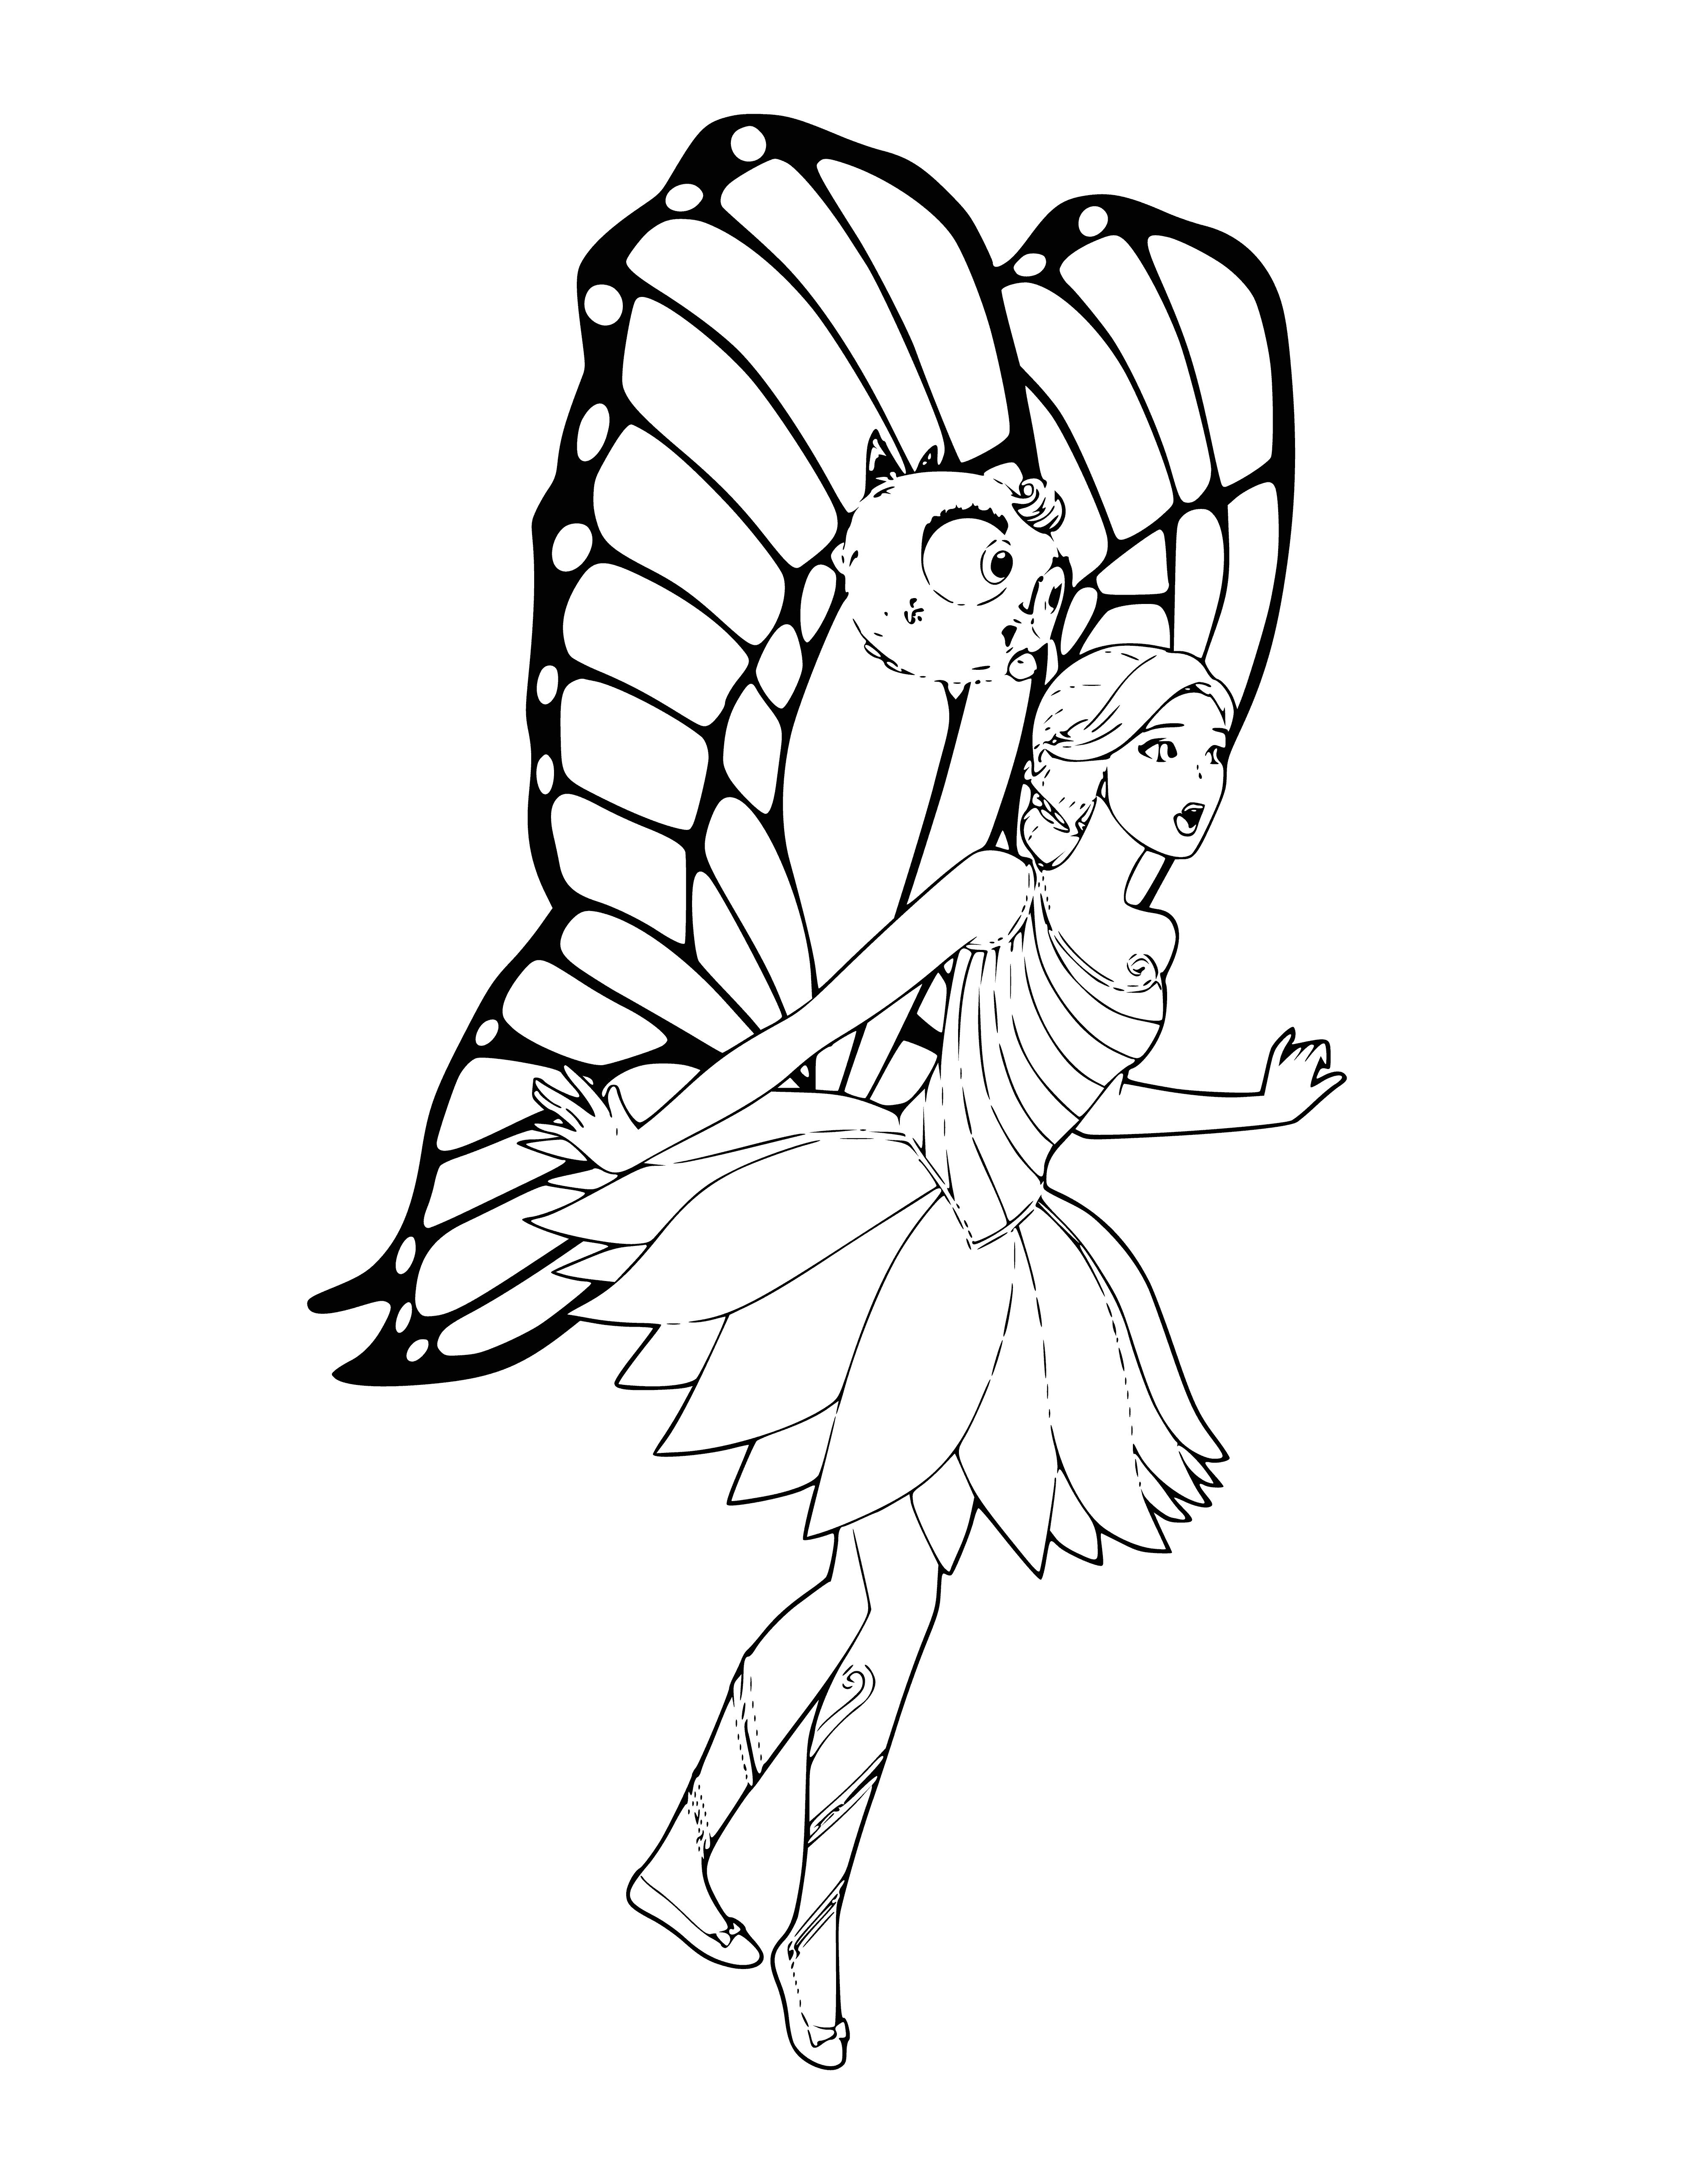 coloring page: Barbie wearing a purple dress with glitter, giant wings and flowers in her hair, looking ready to explore a magical adventure.